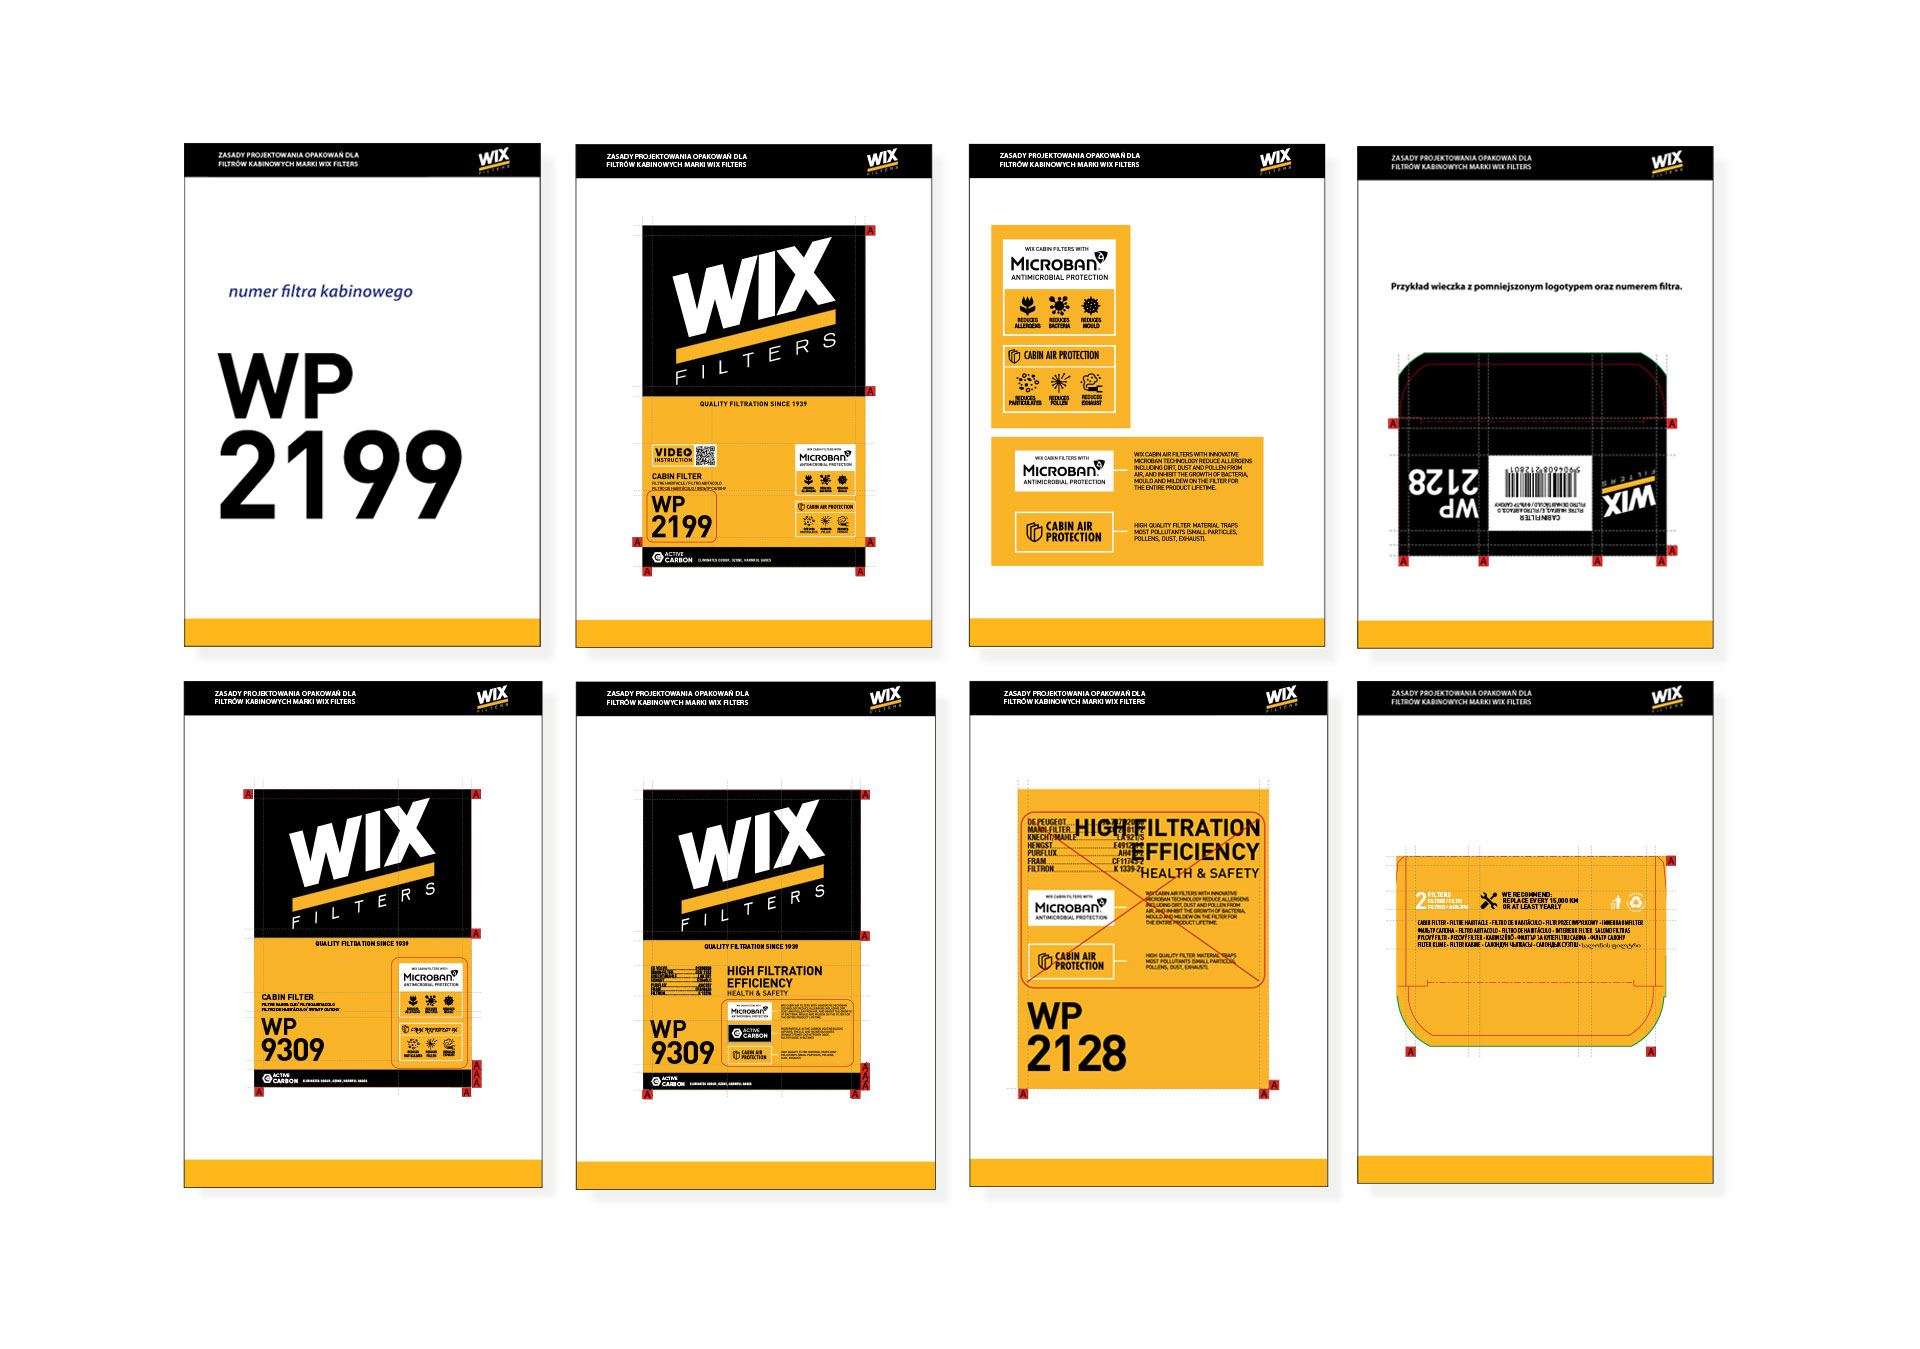 New Wix cabin filter packaging design, icons and symbols